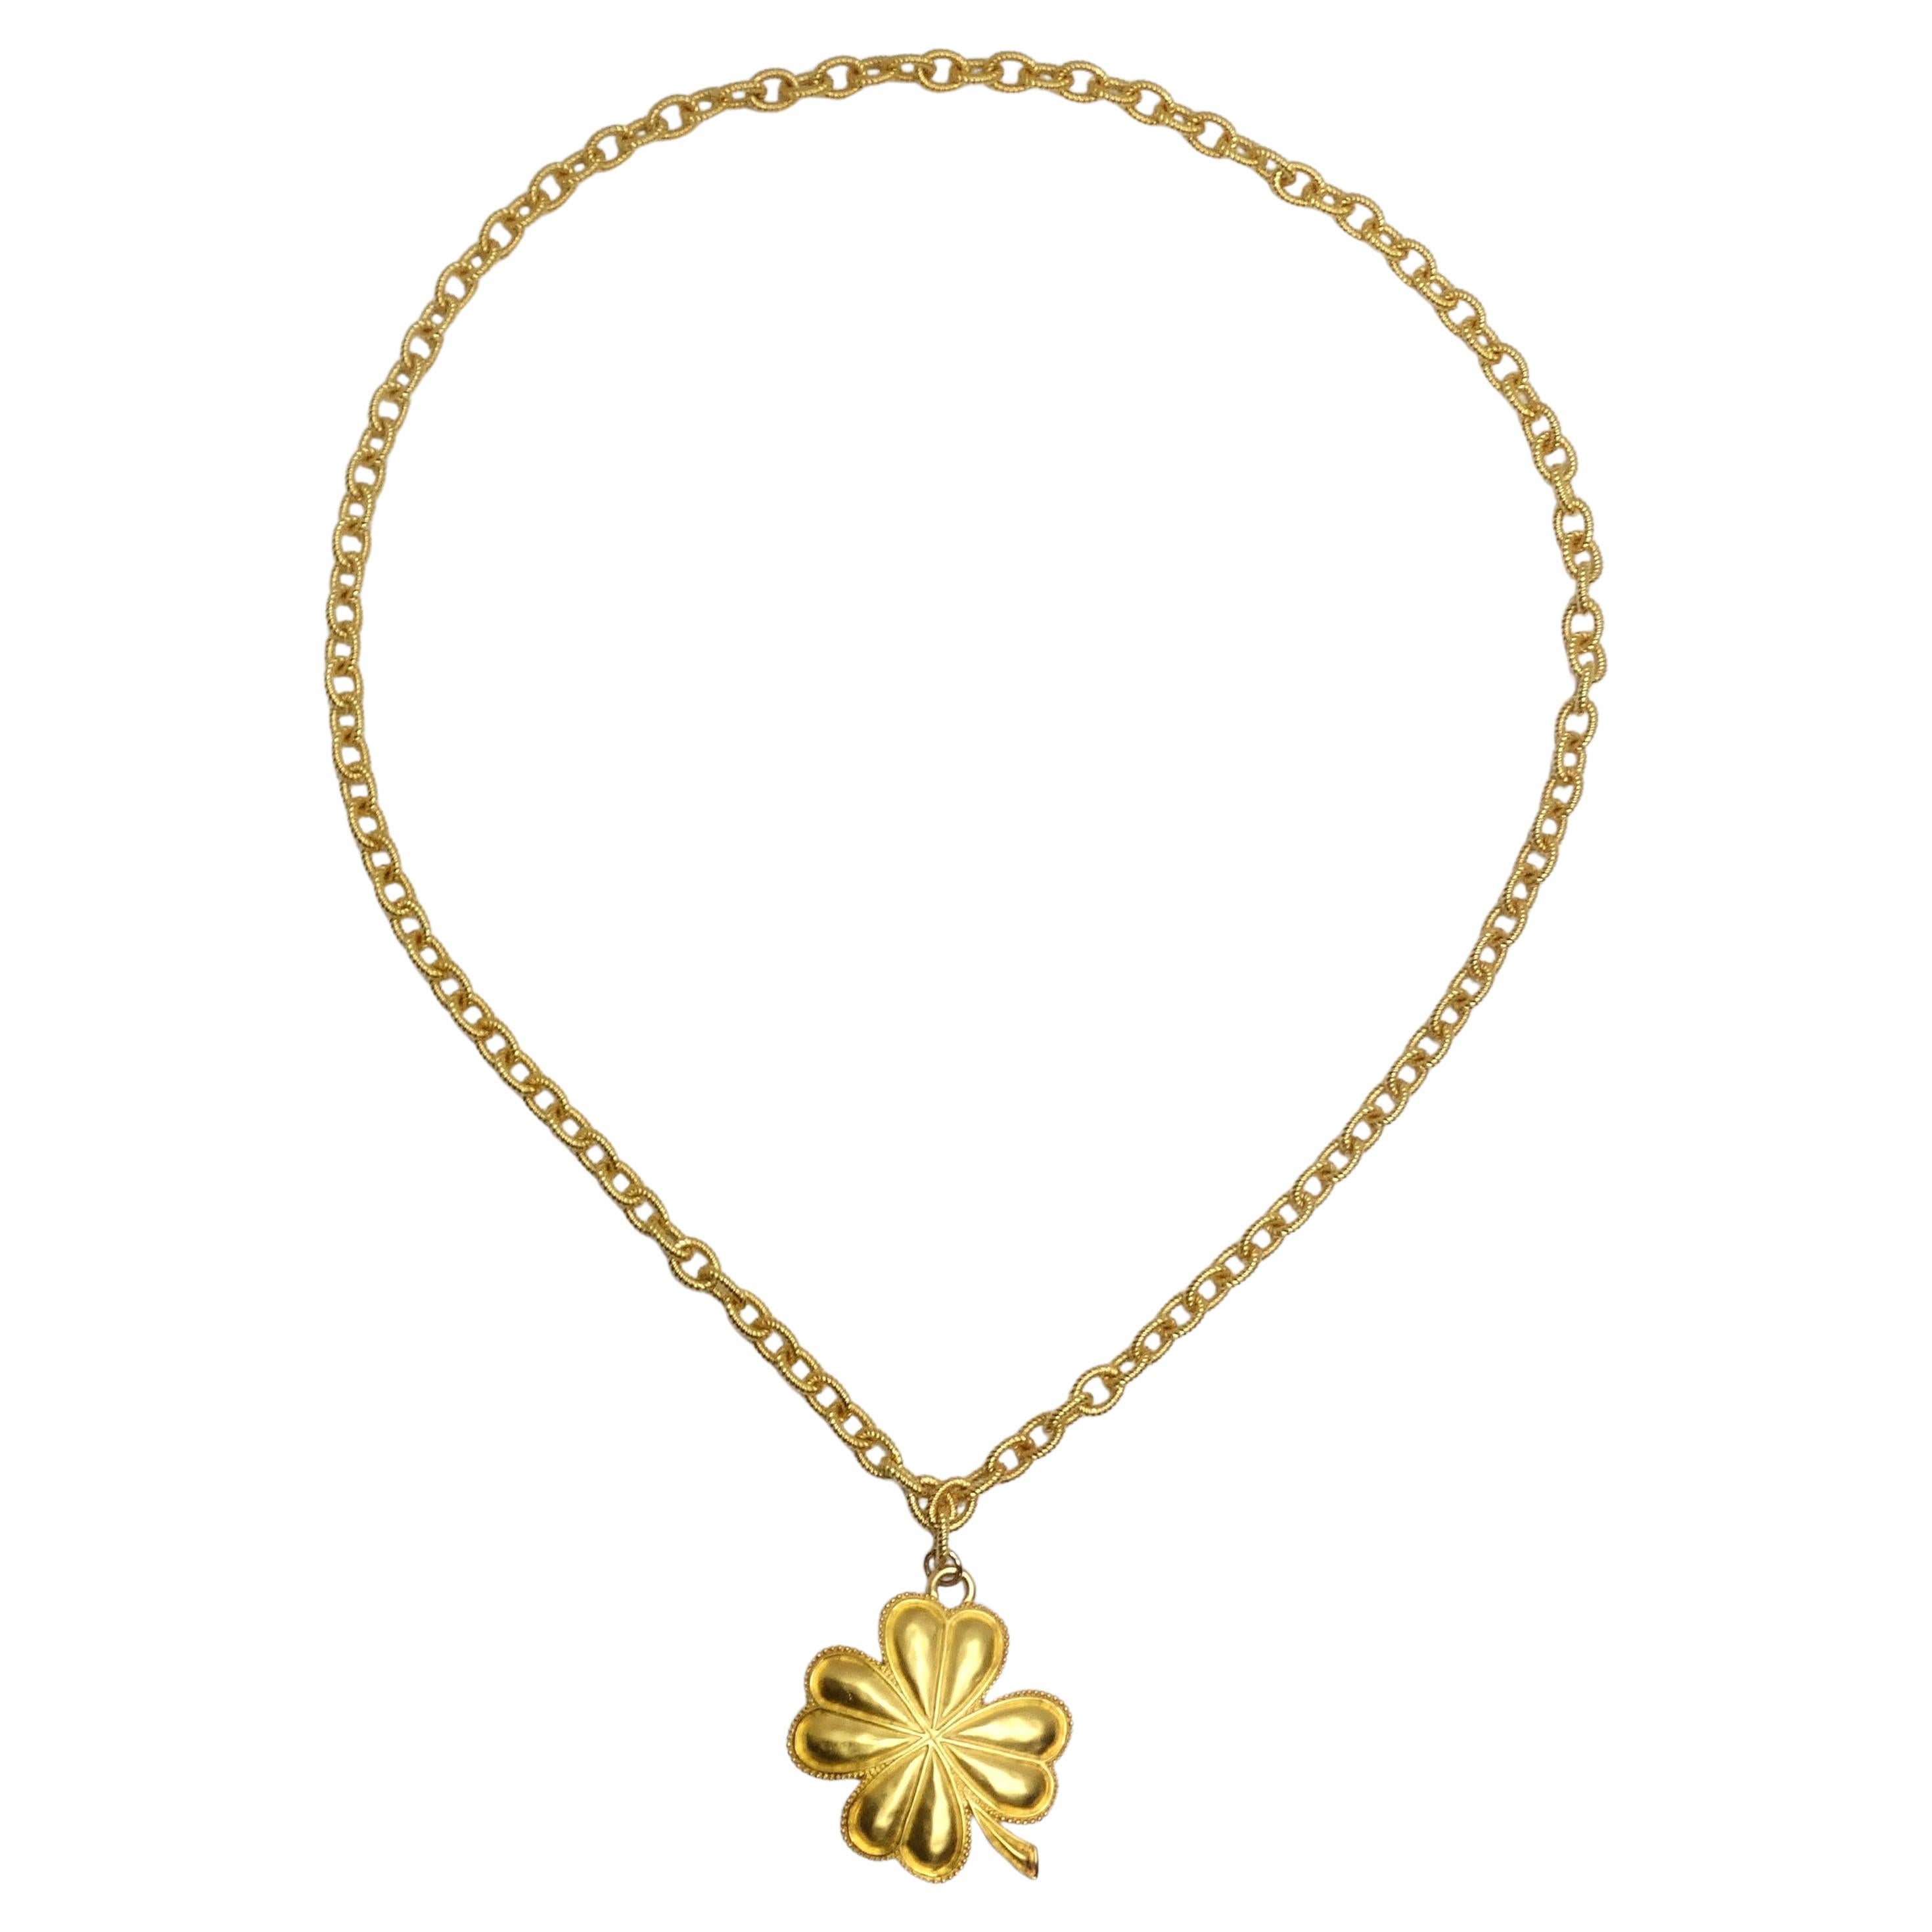 Introducing the Karl Lagerfeld 1980s Gold Plated Shamrock Pendant Necklace – your lucky charm! This stunning, shiny yellow gold plated necklace features a gold plated chain that gracefully gives way to a large, shiny gold plated shamrock pendant.